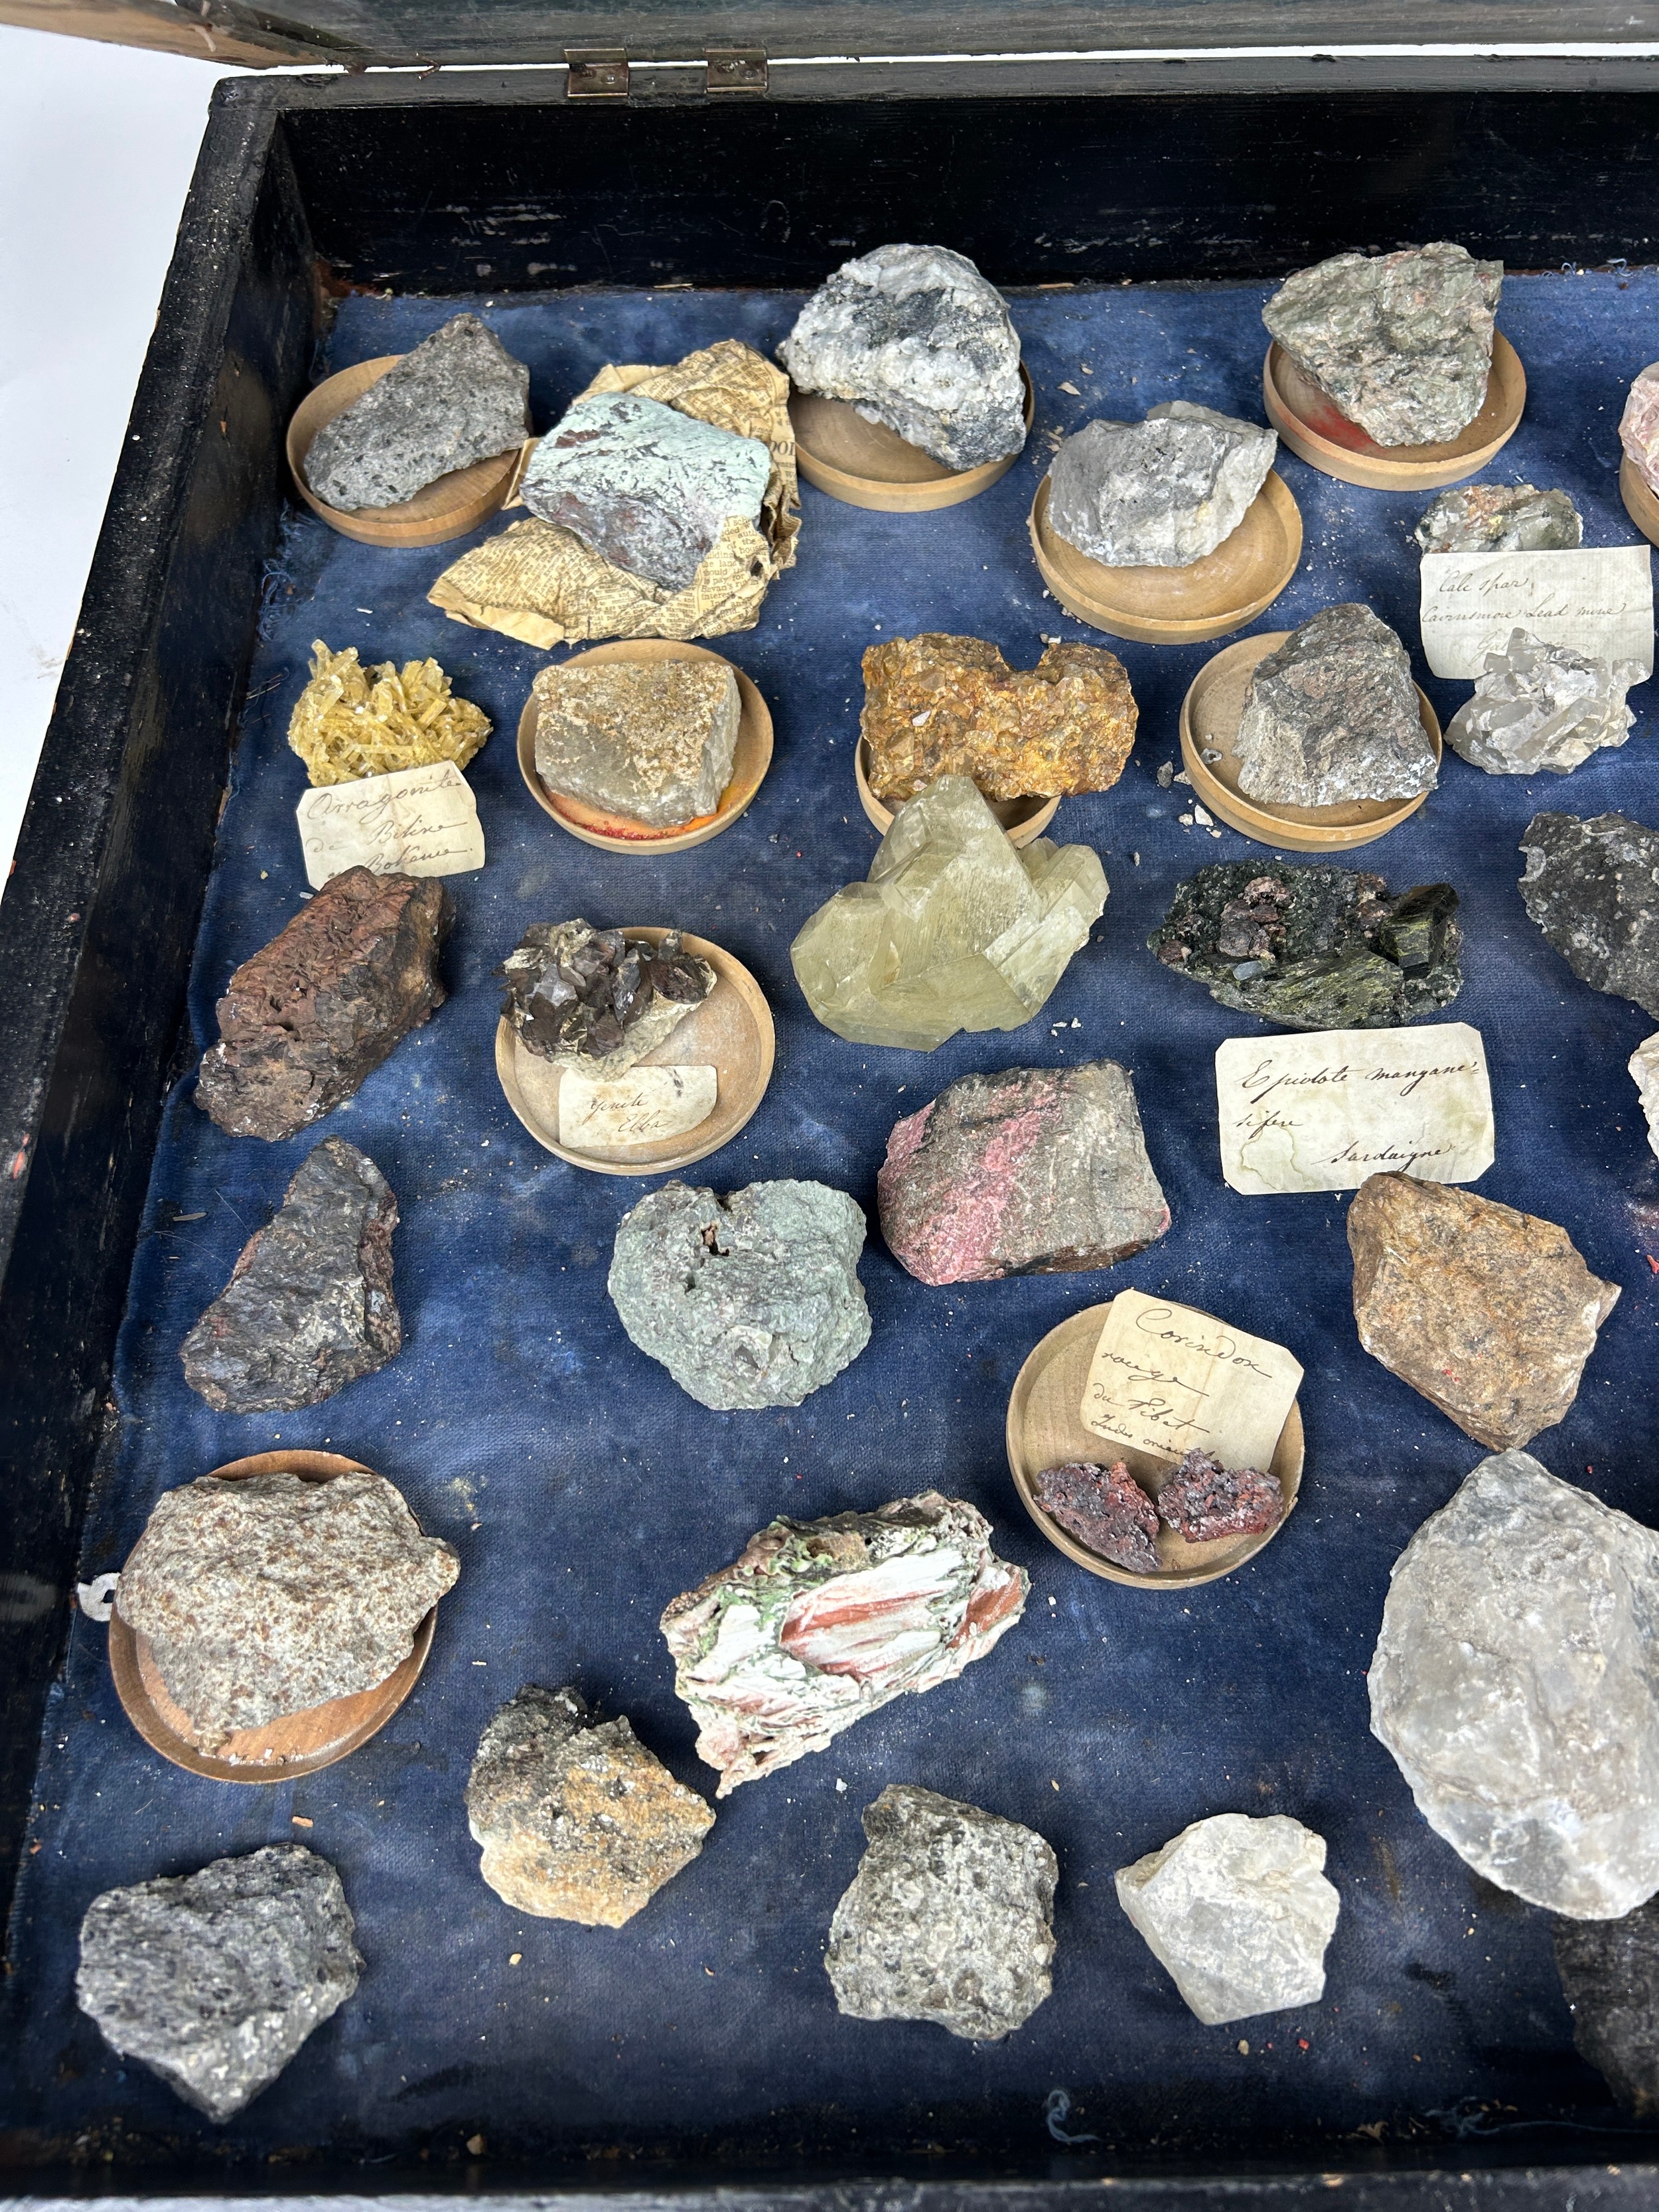 A RARE CABINET COLLECTION OF MINERALS CIRCA 1810-1860, including labels for some very important - Image 20 of 30